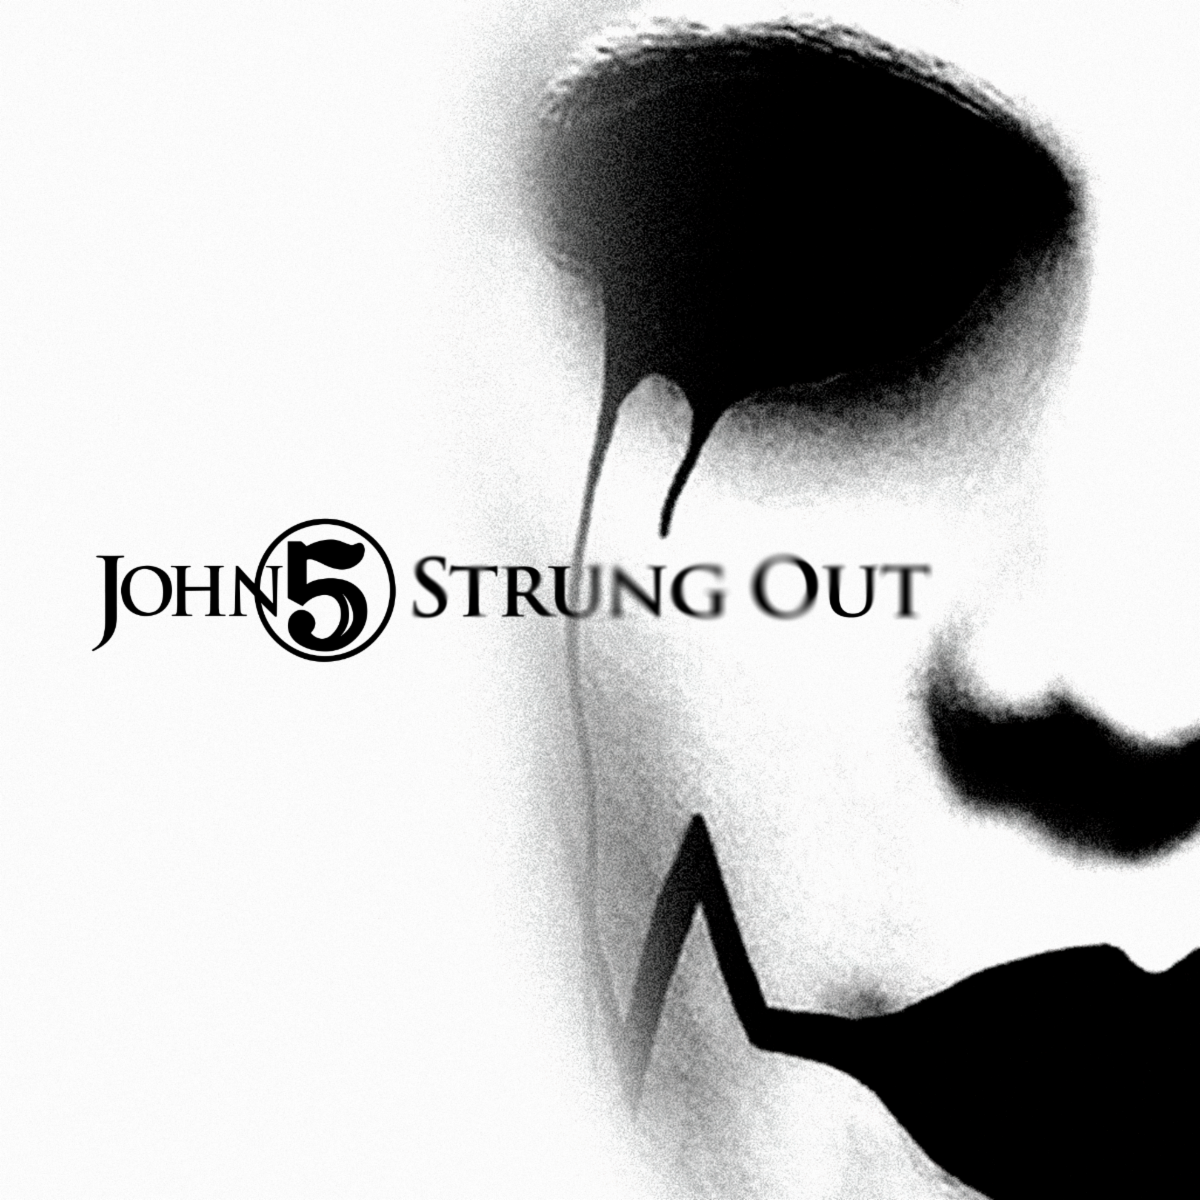 JOHN 5 "Strung Out" Playthrough Video Launches Today